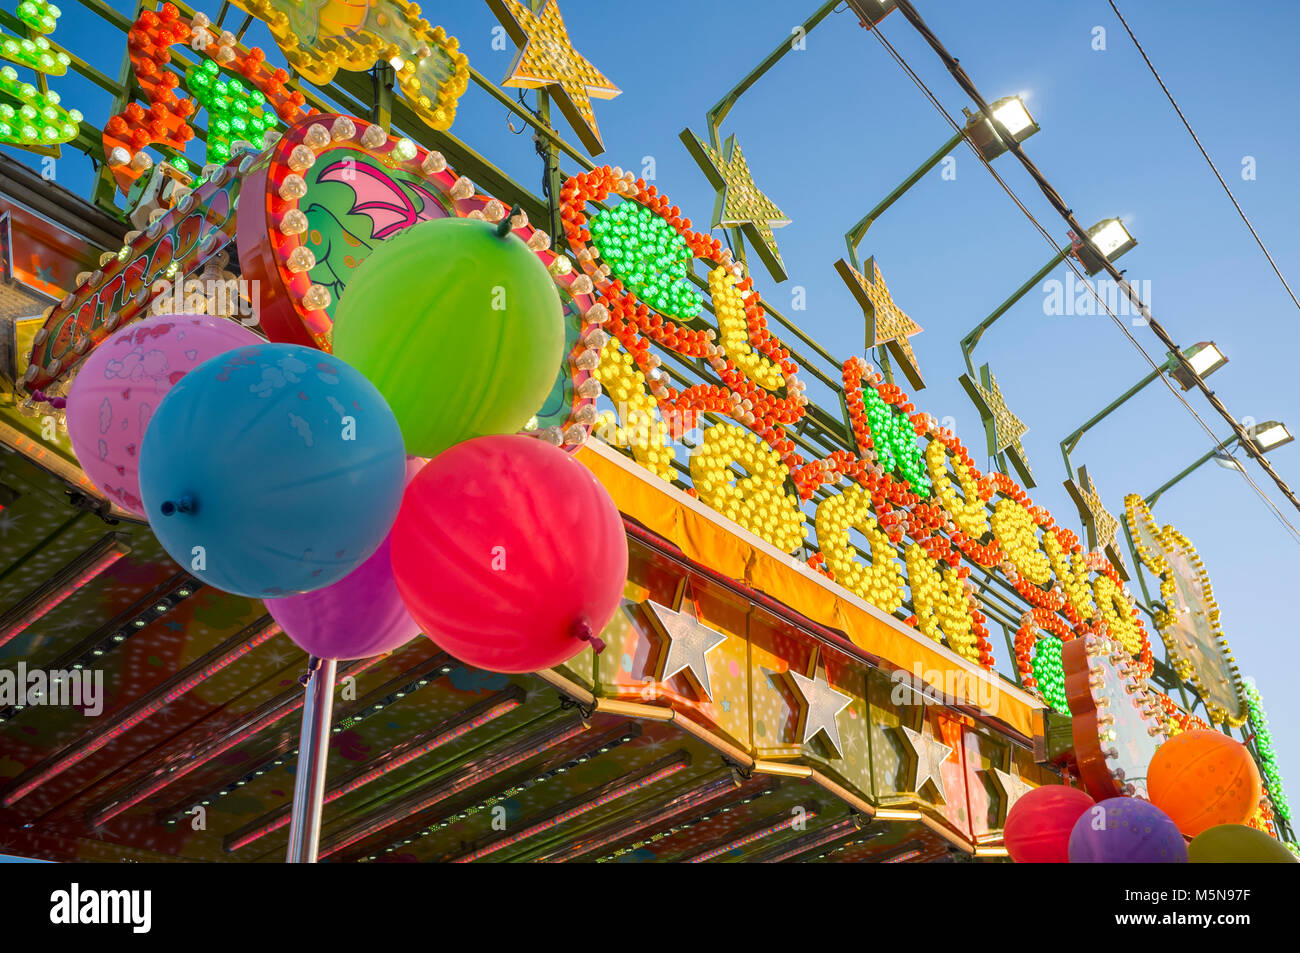 Fairground attraction front plenty of bulbs, leds, balloons and colors. Daylight shot Stock Photo